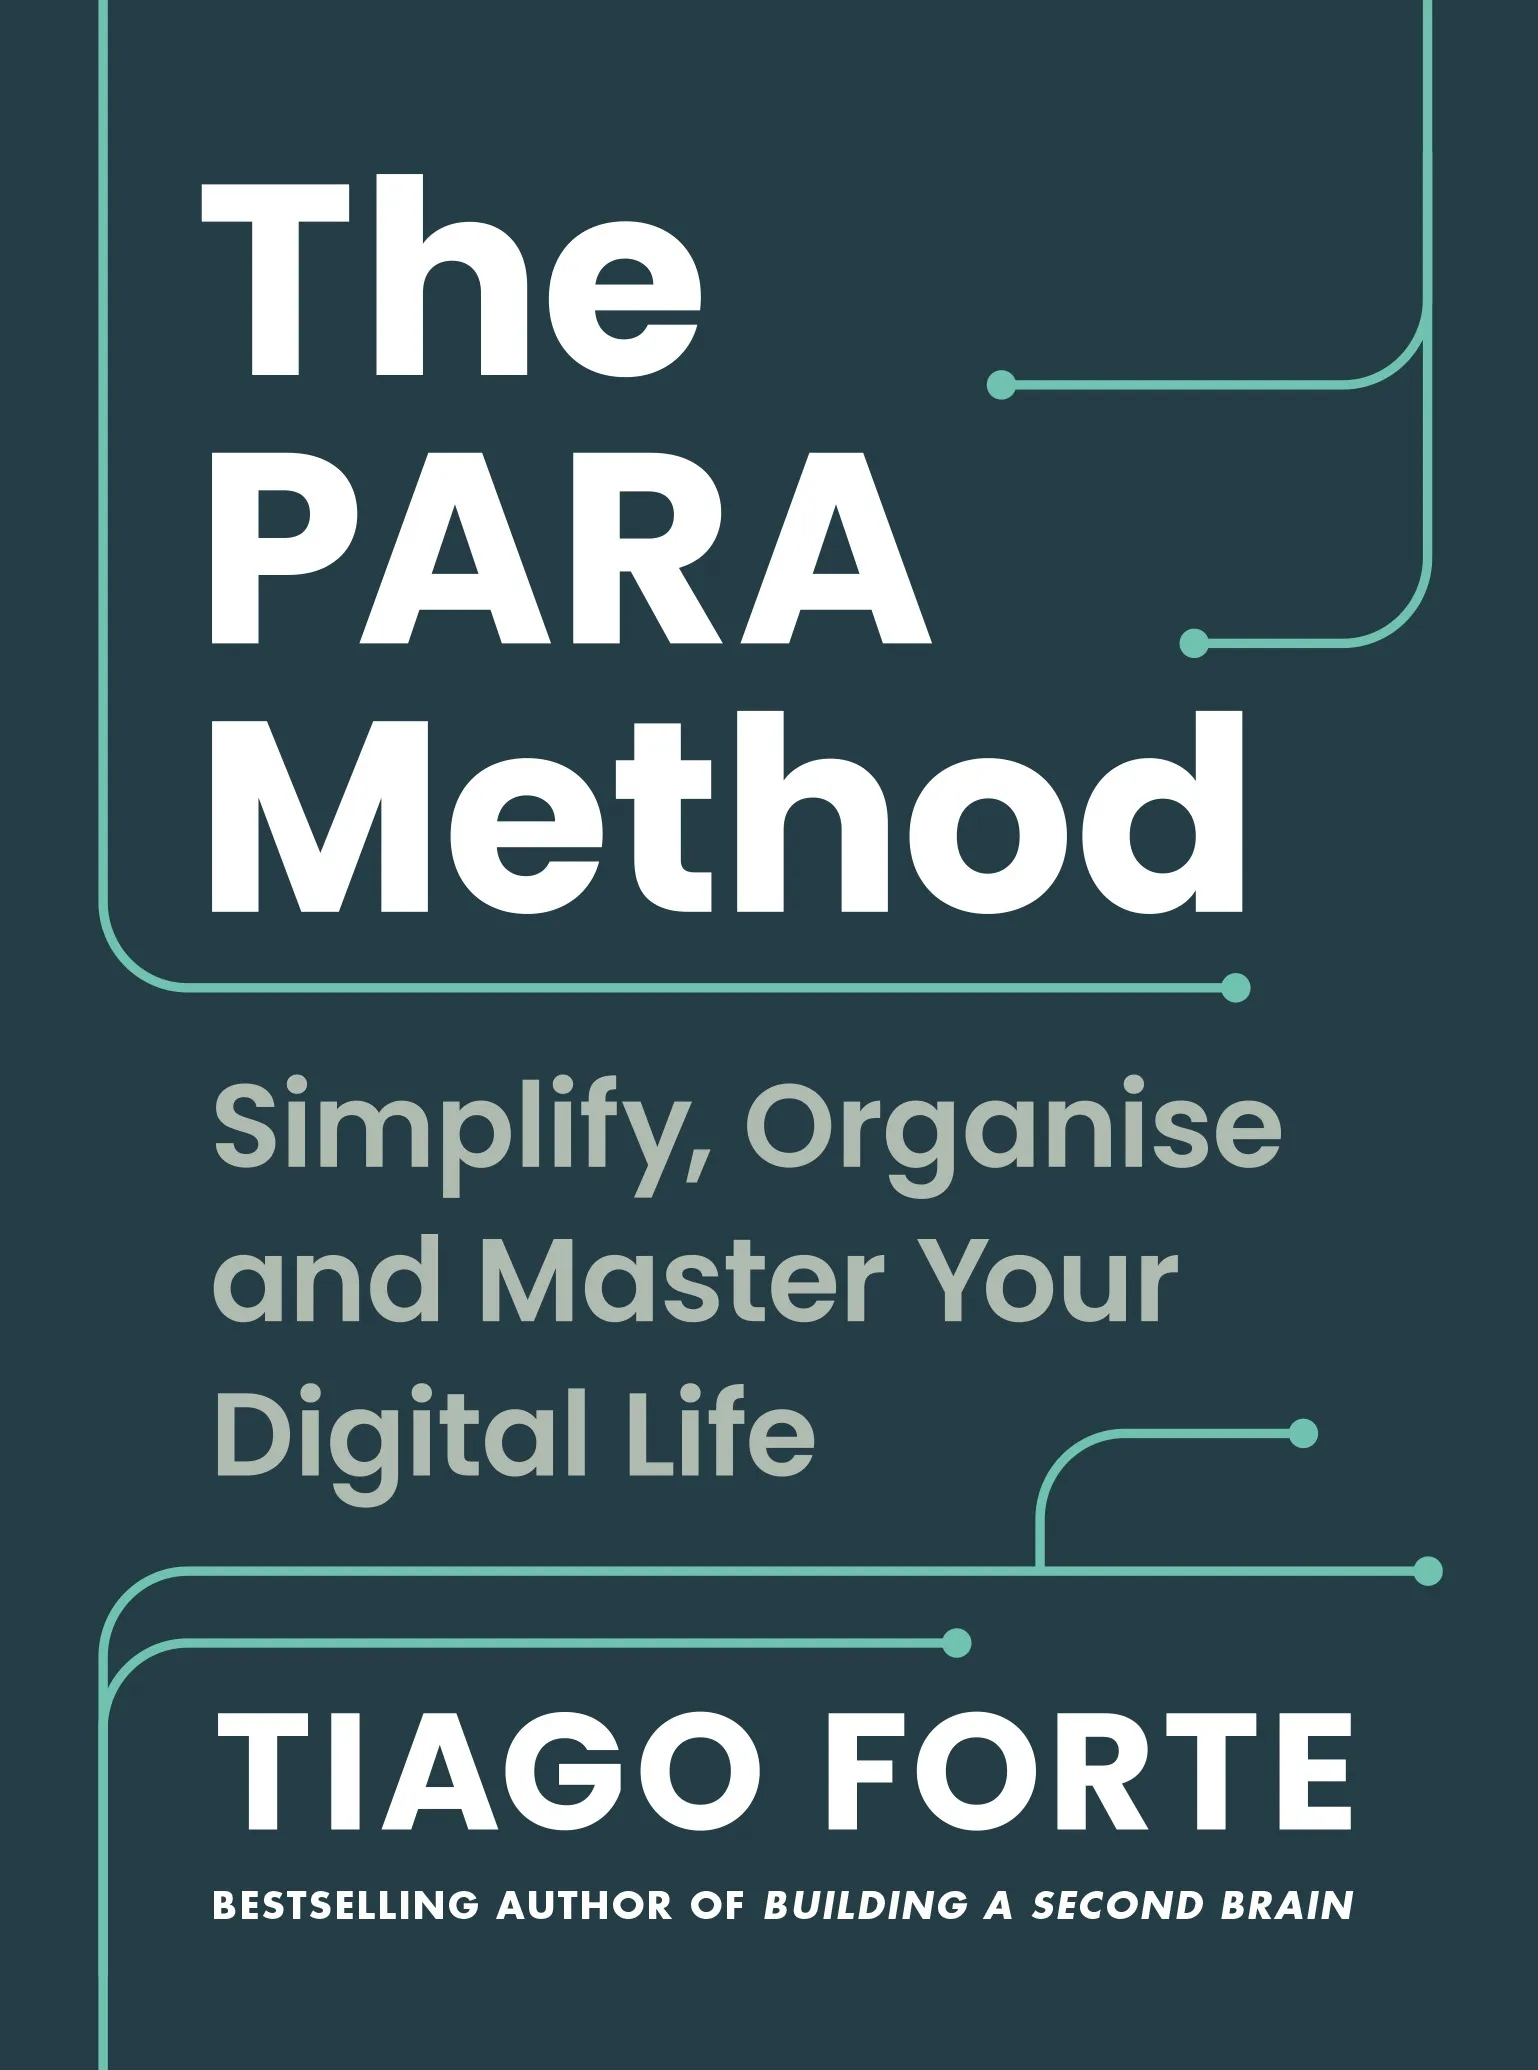 Cover of the book title The PARA Method